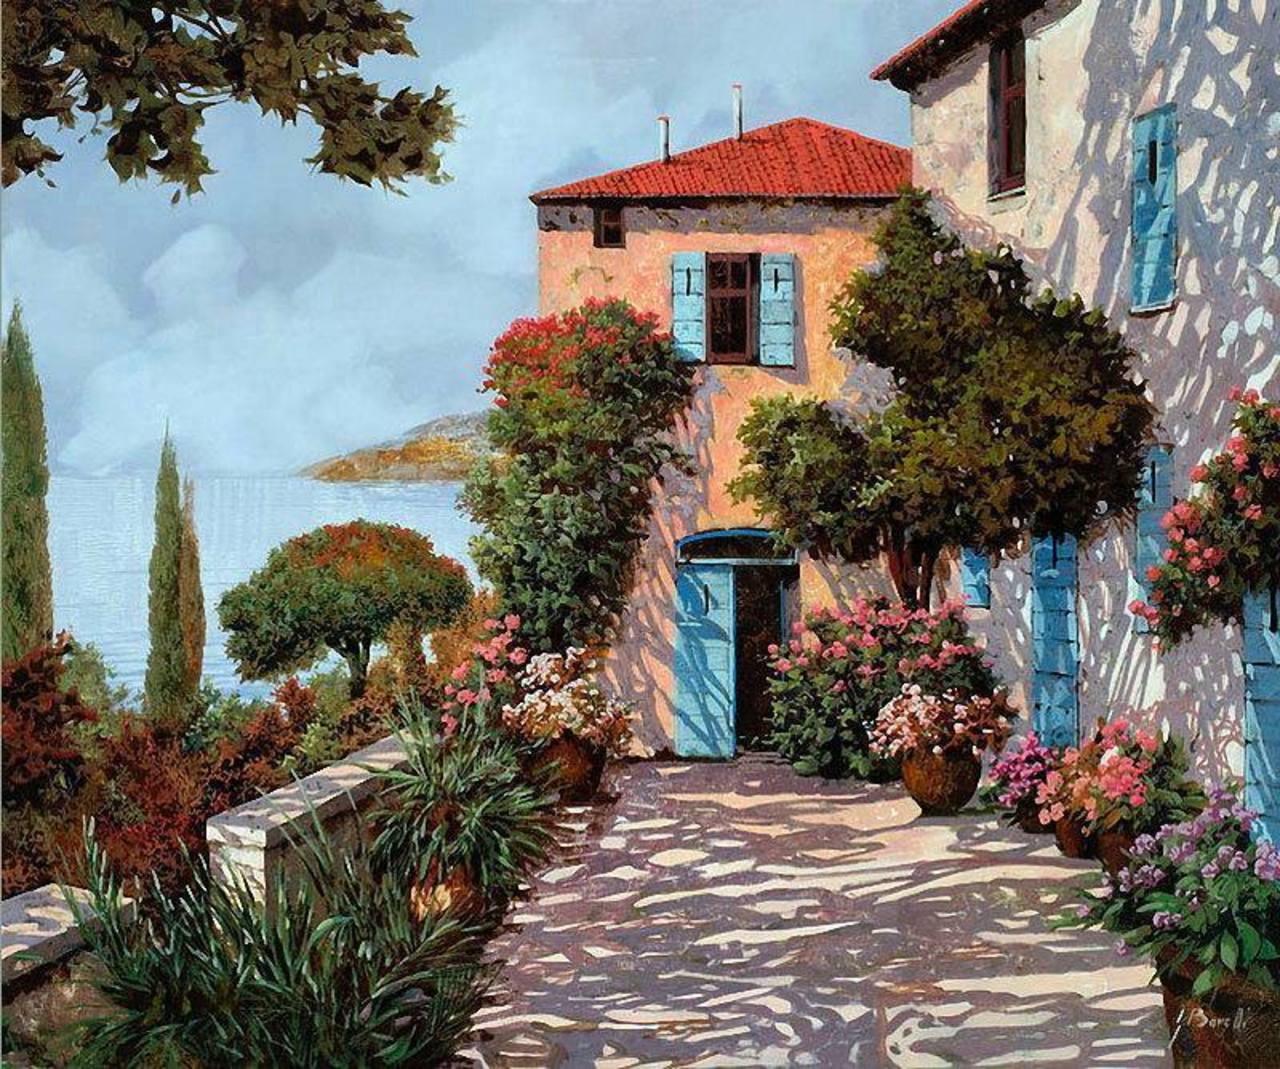 Freedom is the open window through which pours the sunlight of the human spirit and human dignity #art Guido Borelli https://t.co/Am4nMe8qeE